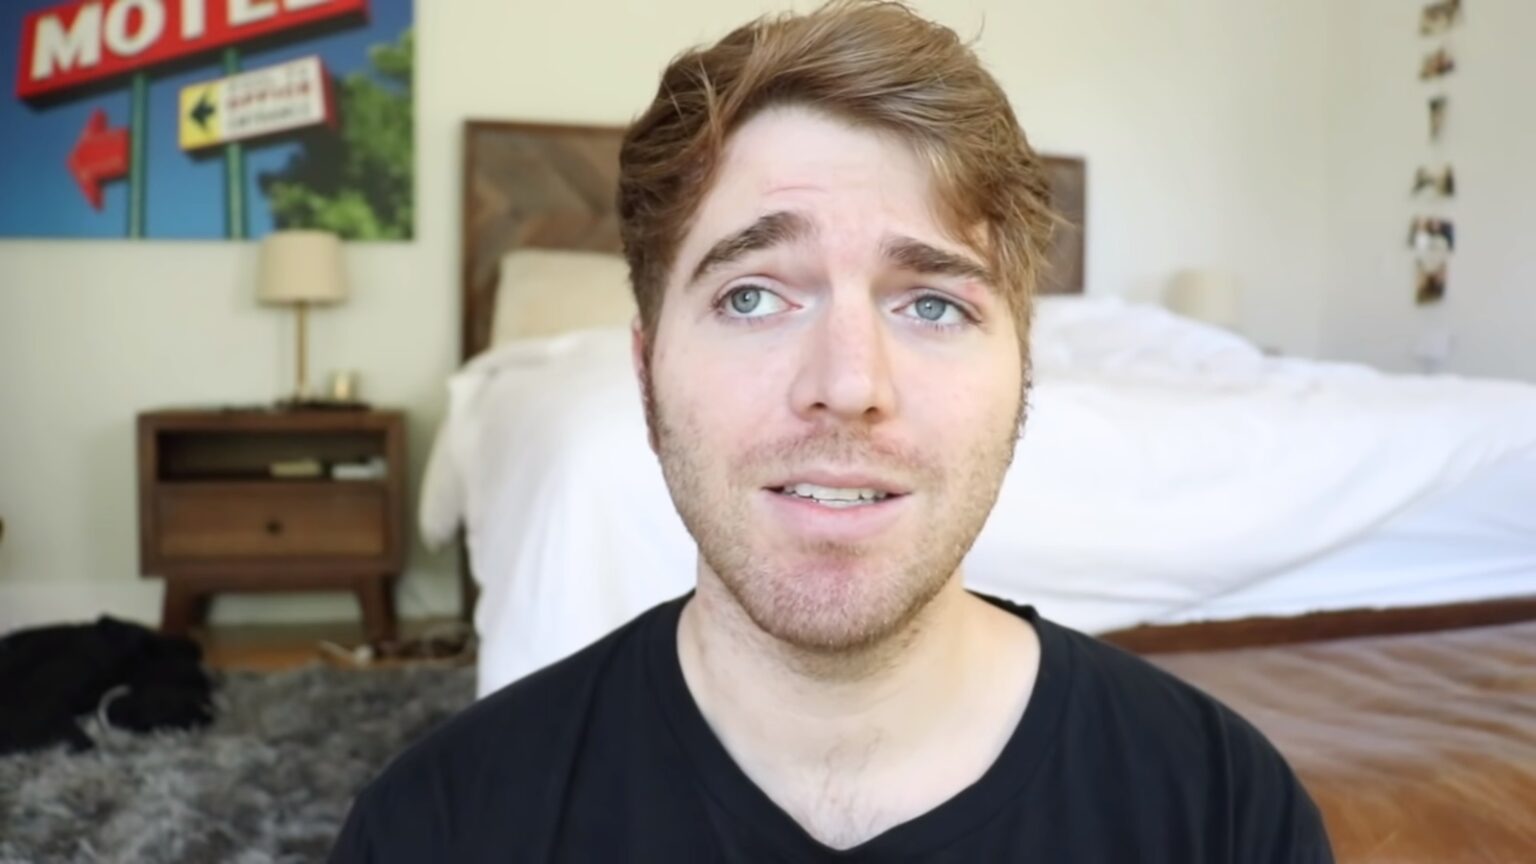 Looks like Shane Dawson is still on a mission to increase his net worth. Here's Dawson's recent bid for a higher net worth.